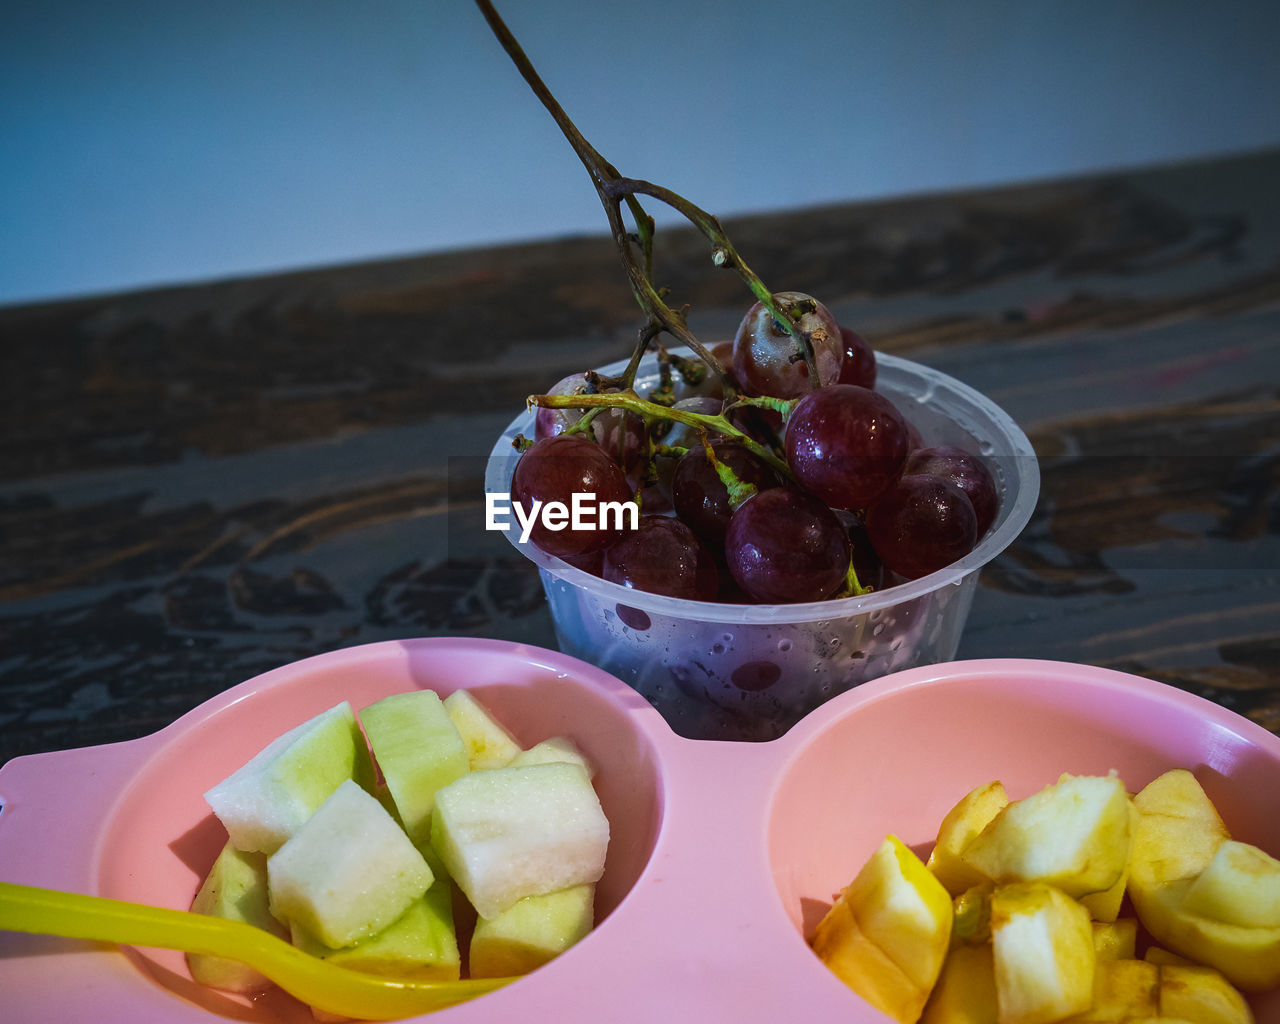 CLOSE-UP OF FRUITS IN BOWL ON TABLE